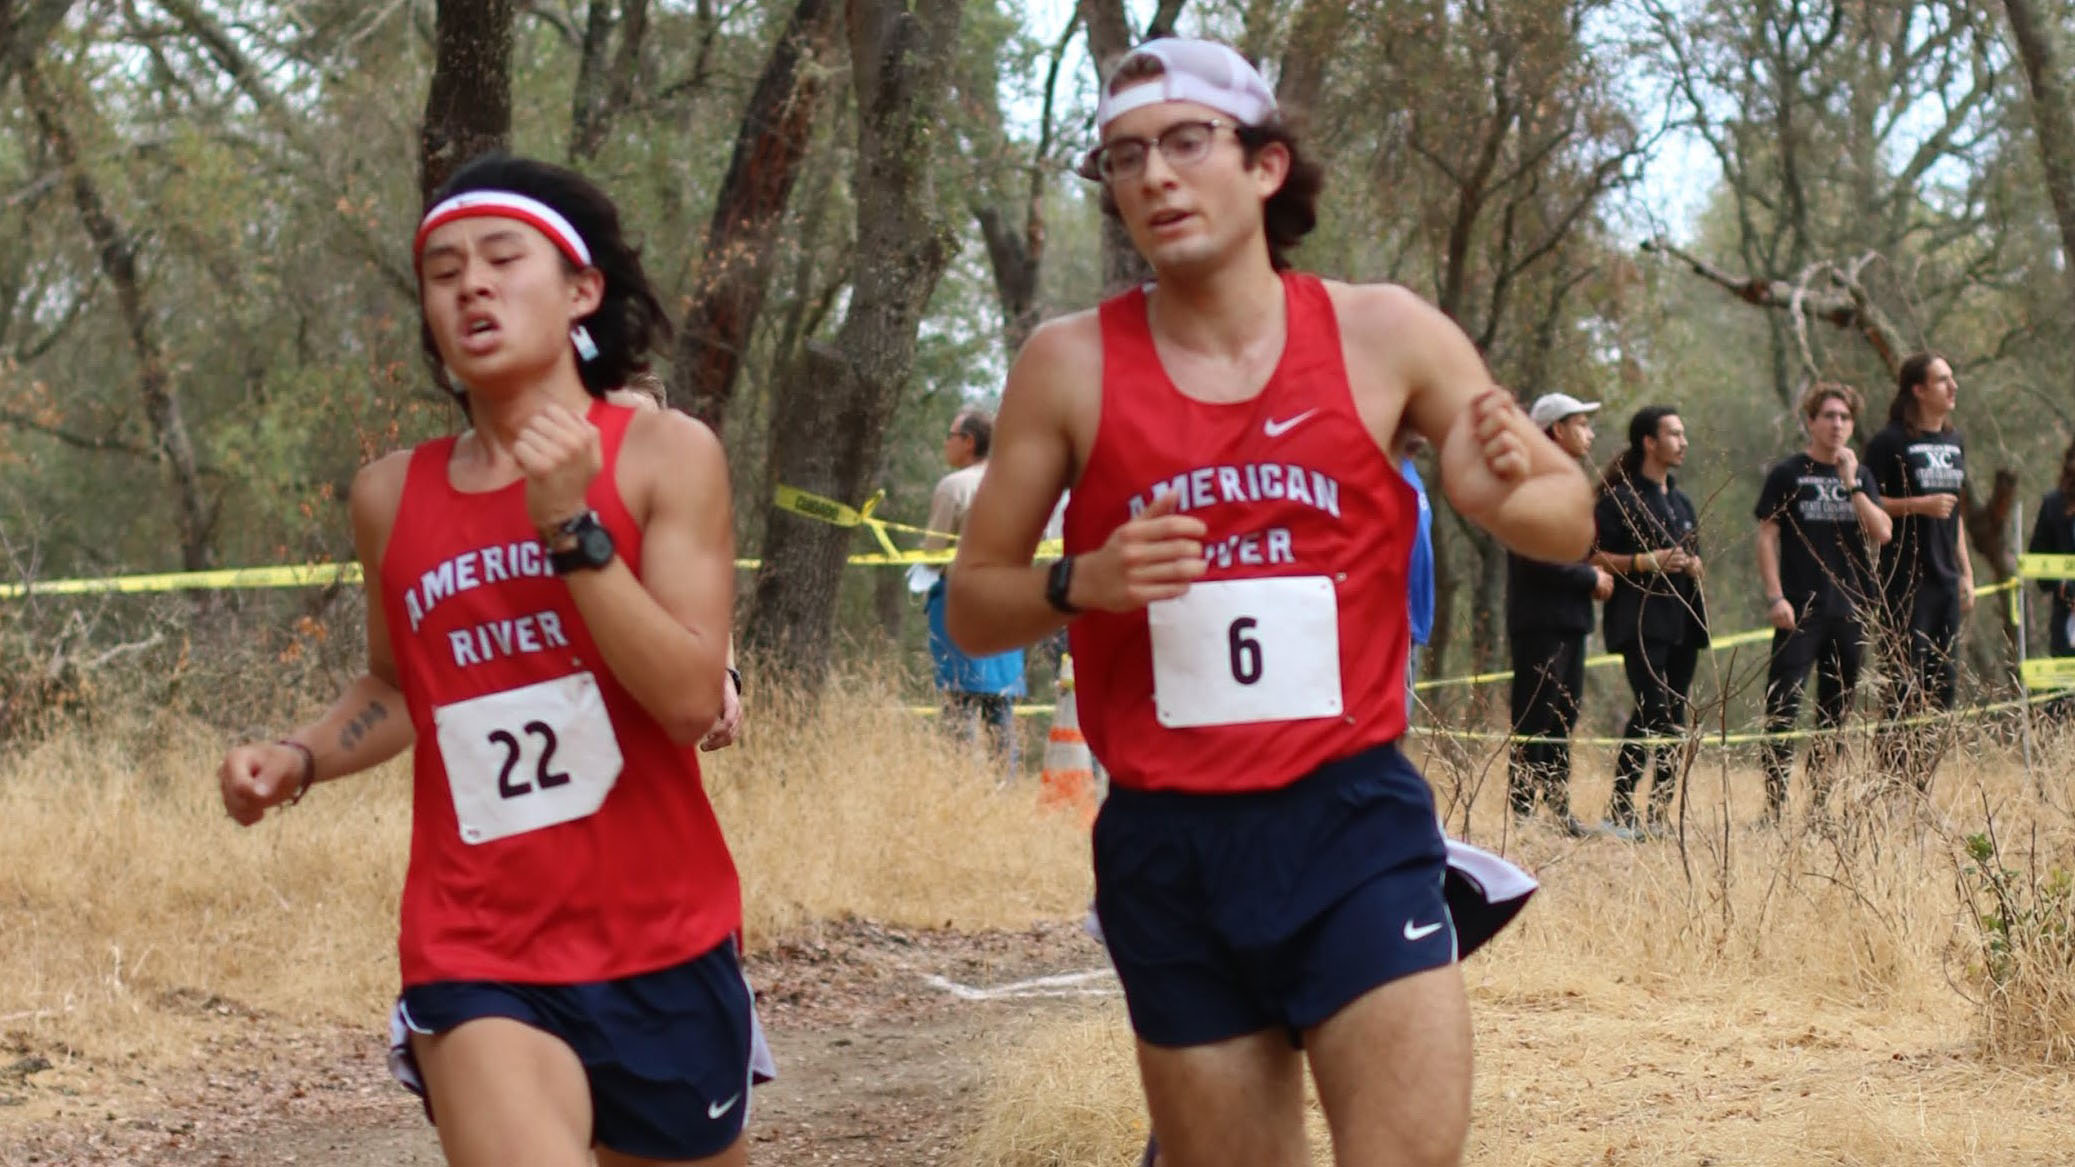 Men's Cross Country Runner-up at NorCal Preview